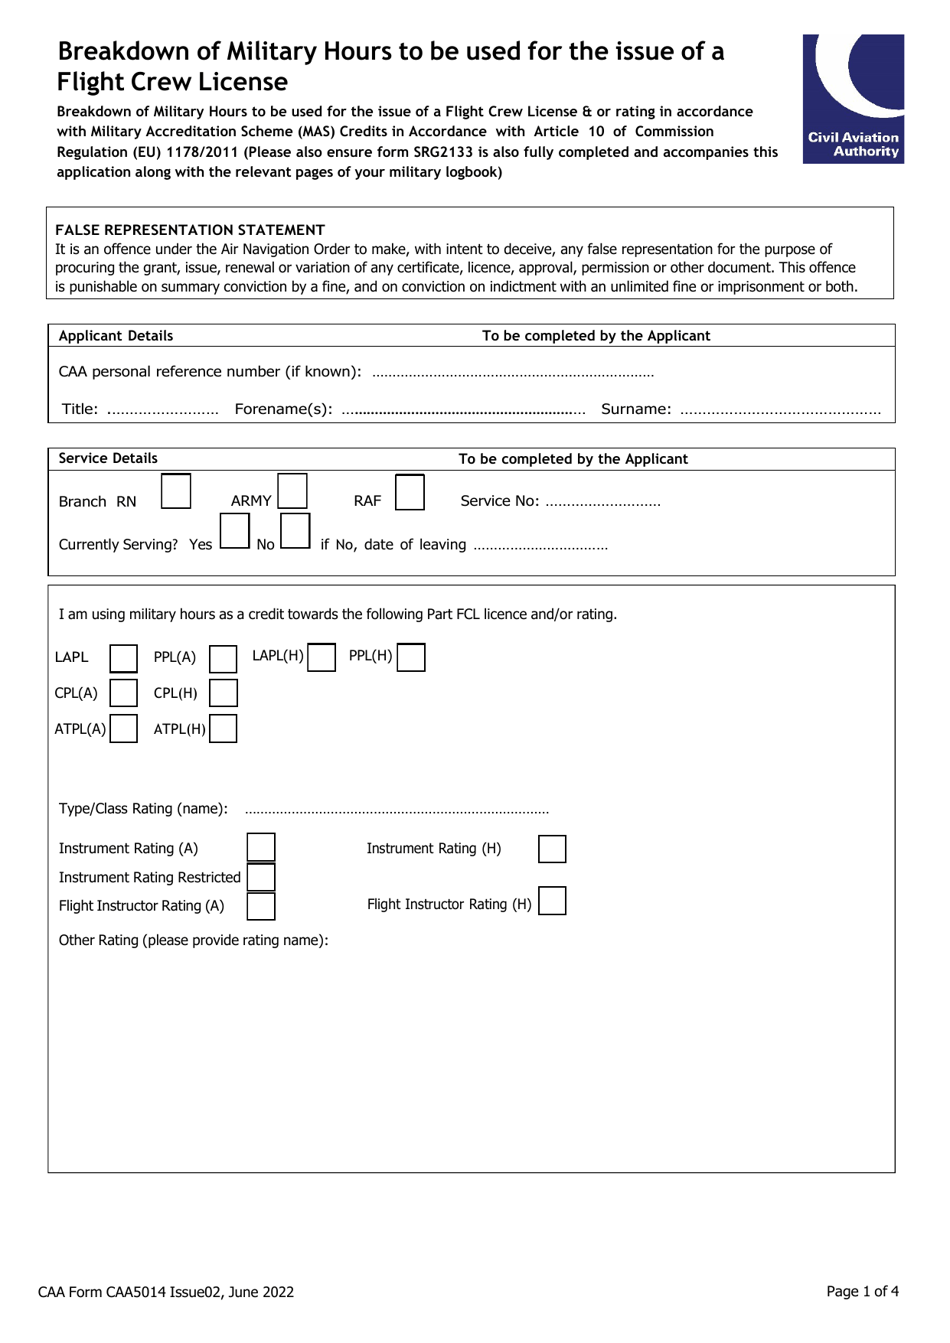 CAA Form CAA5014 Breakdown of Military Hours to Be Used for the Issue of a Flight Crew License - United Kingdom, Page 1